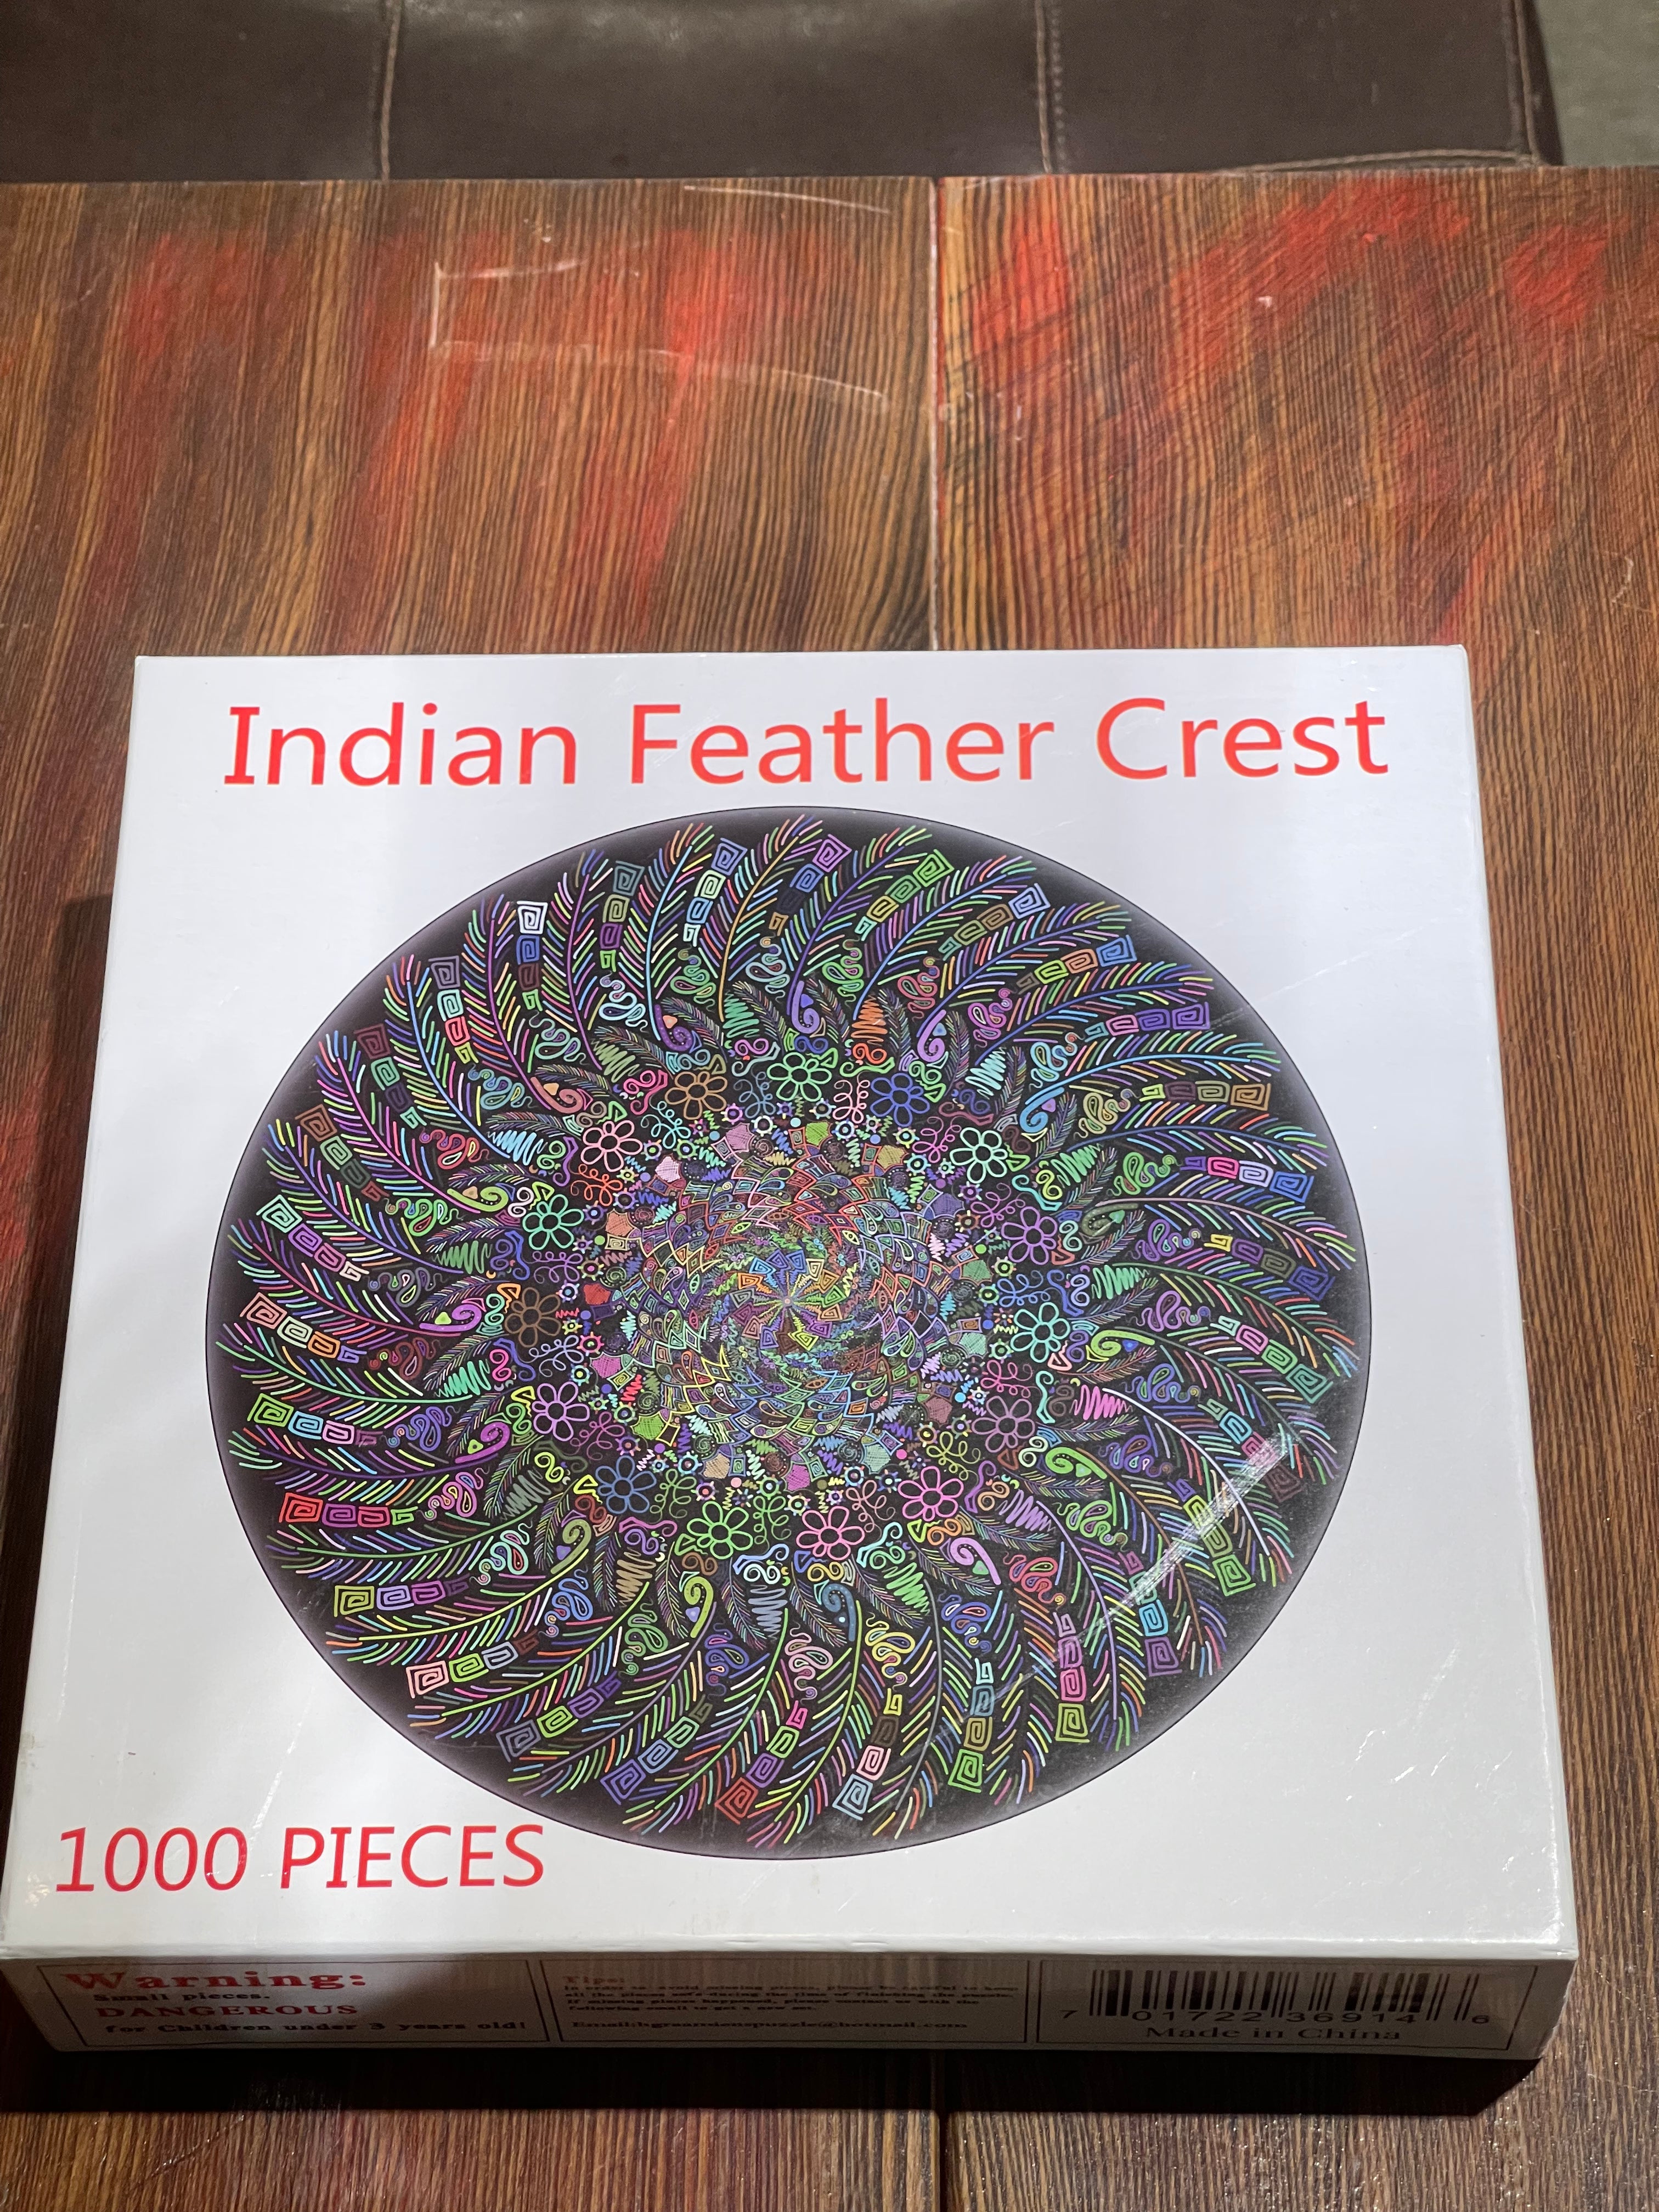 Rental - Jigsaw Puzzle - Circular - Indian Feather Crest